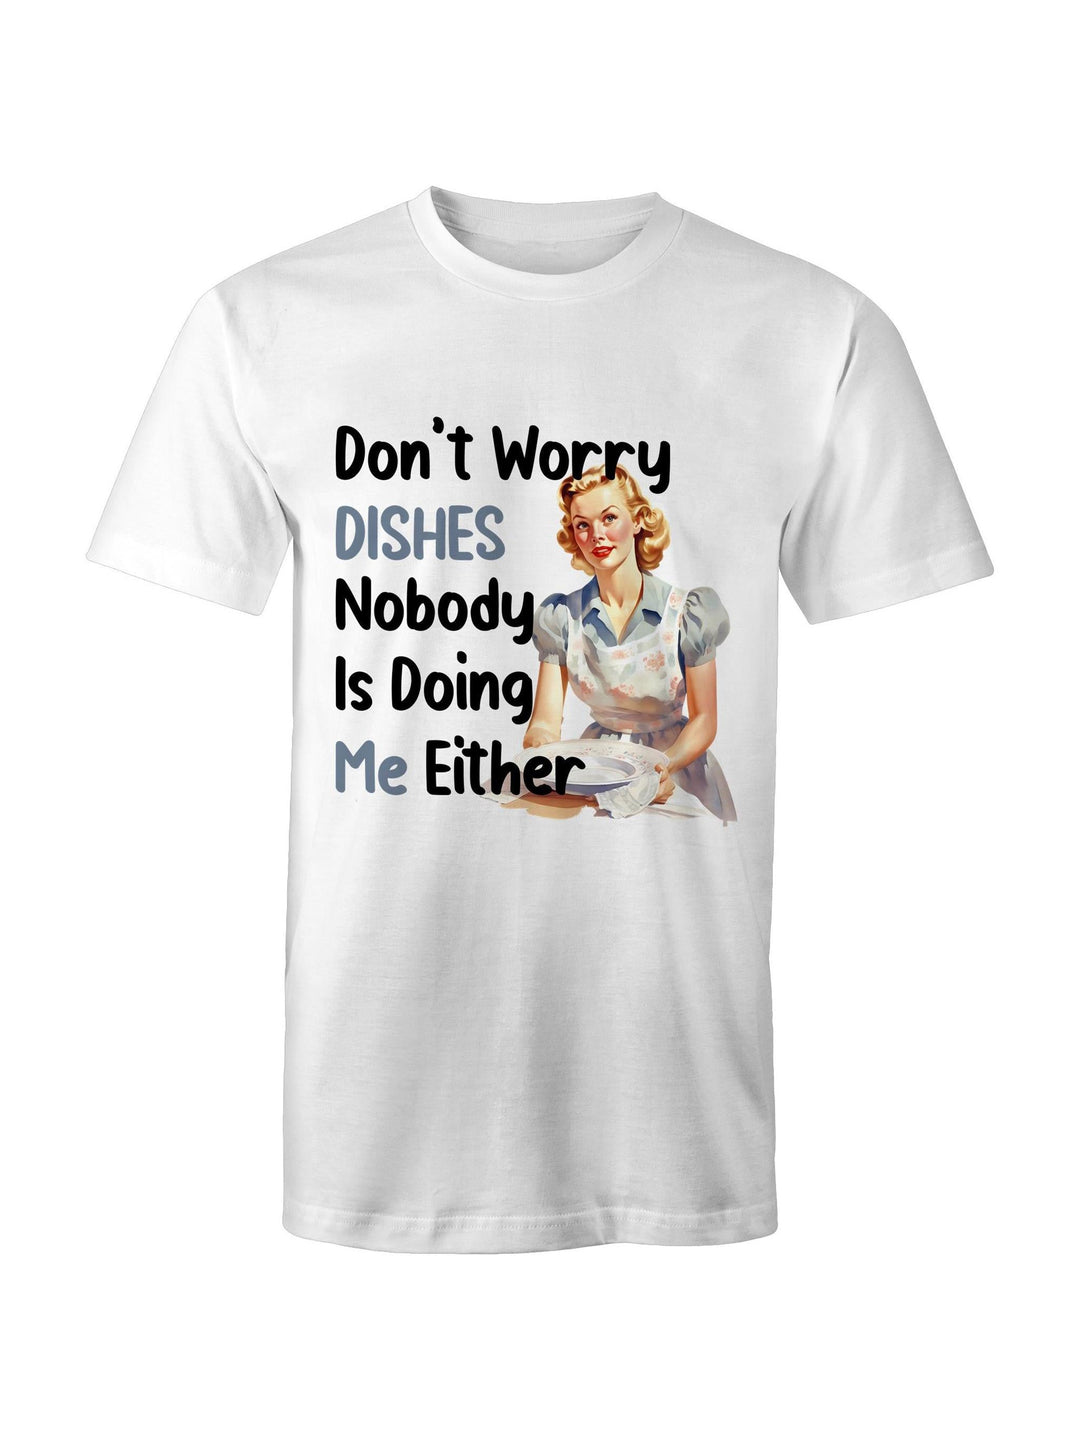 Don't Worry Dishes Tee